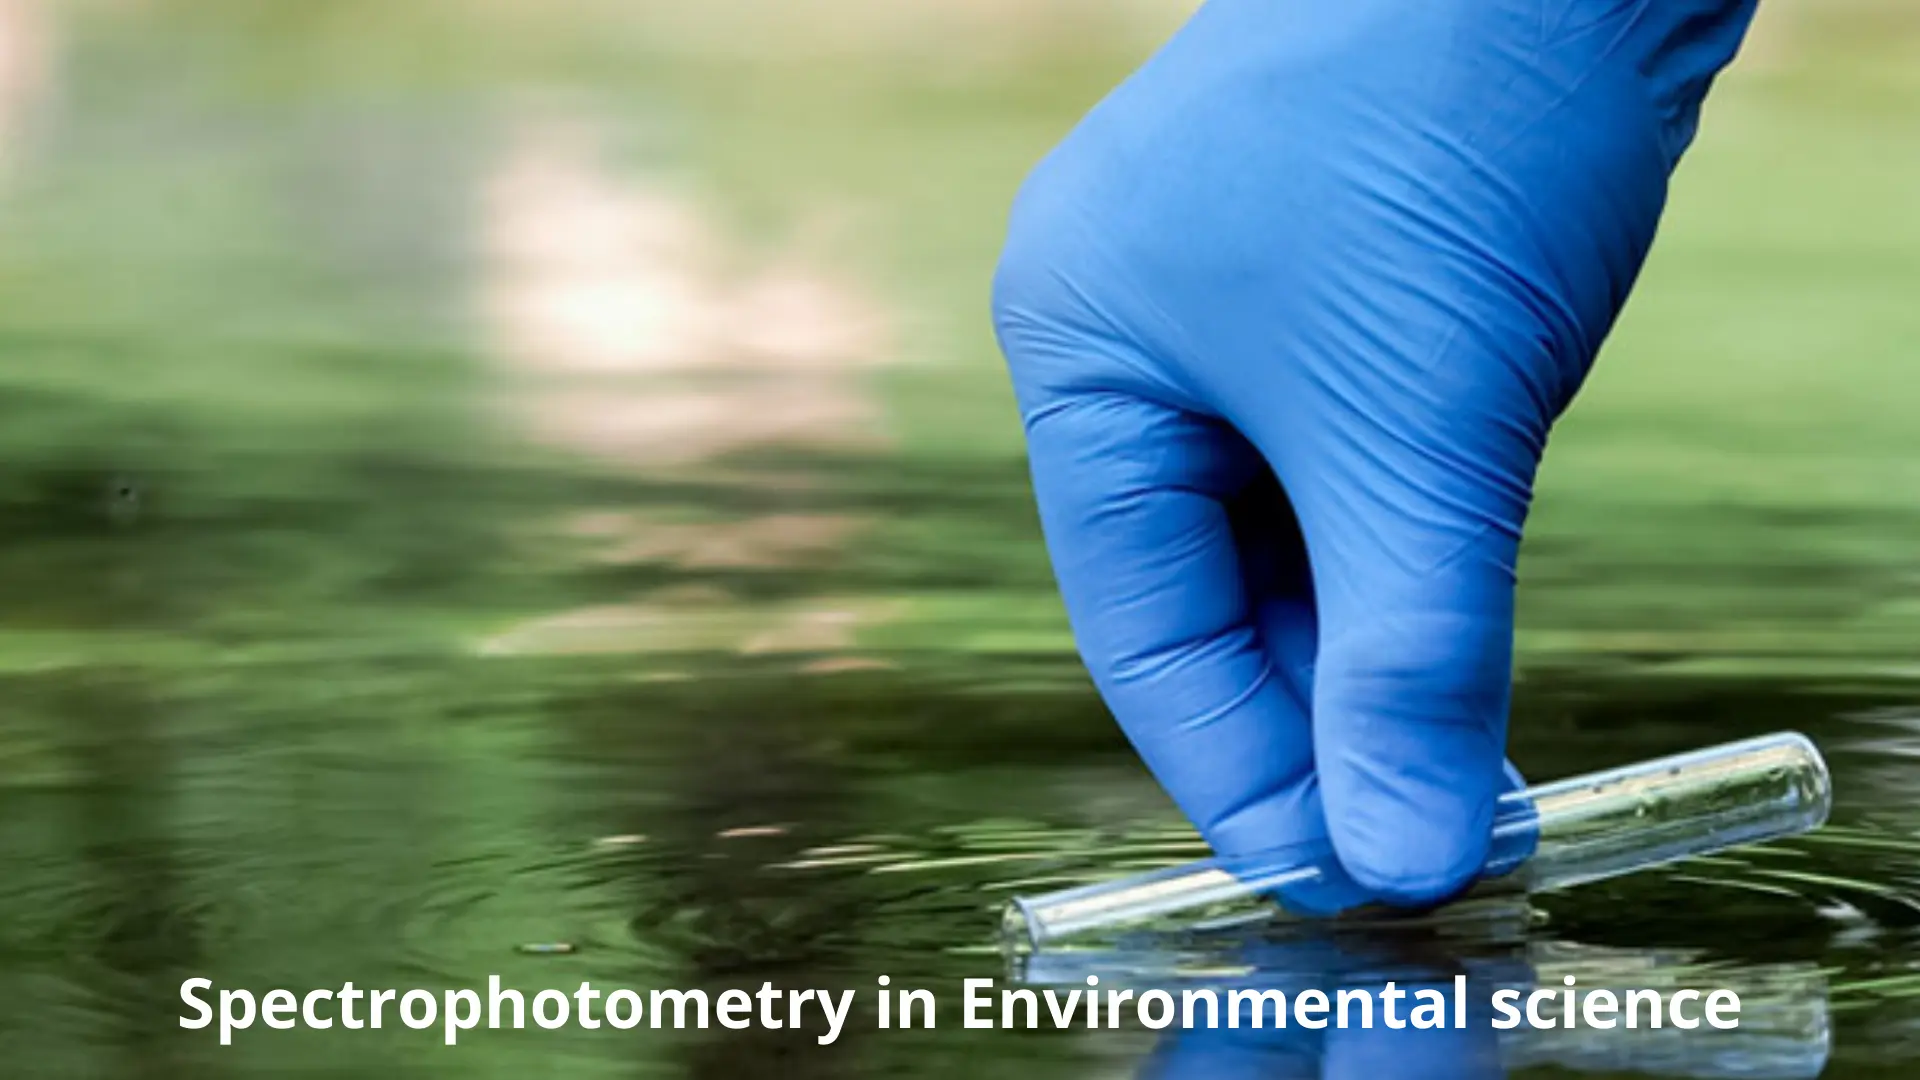 Spectrophotometry in Environmental science